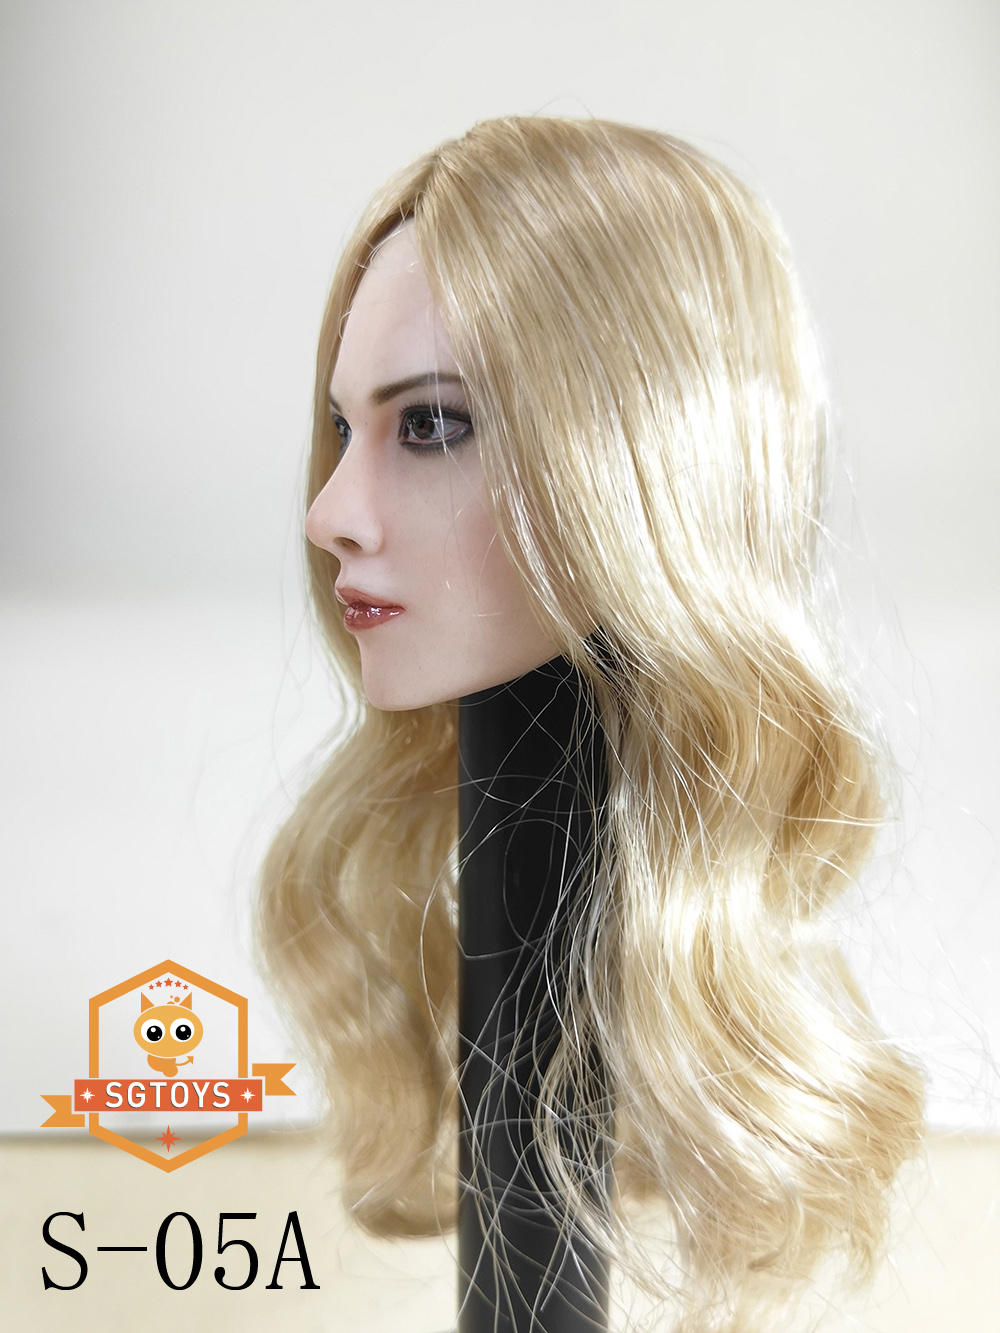 SGToys - NEW PRODUCT: SGTOYS New product: 1/6 Female head carving S-05# - Three hairstyles (for TBLeague body) 3148